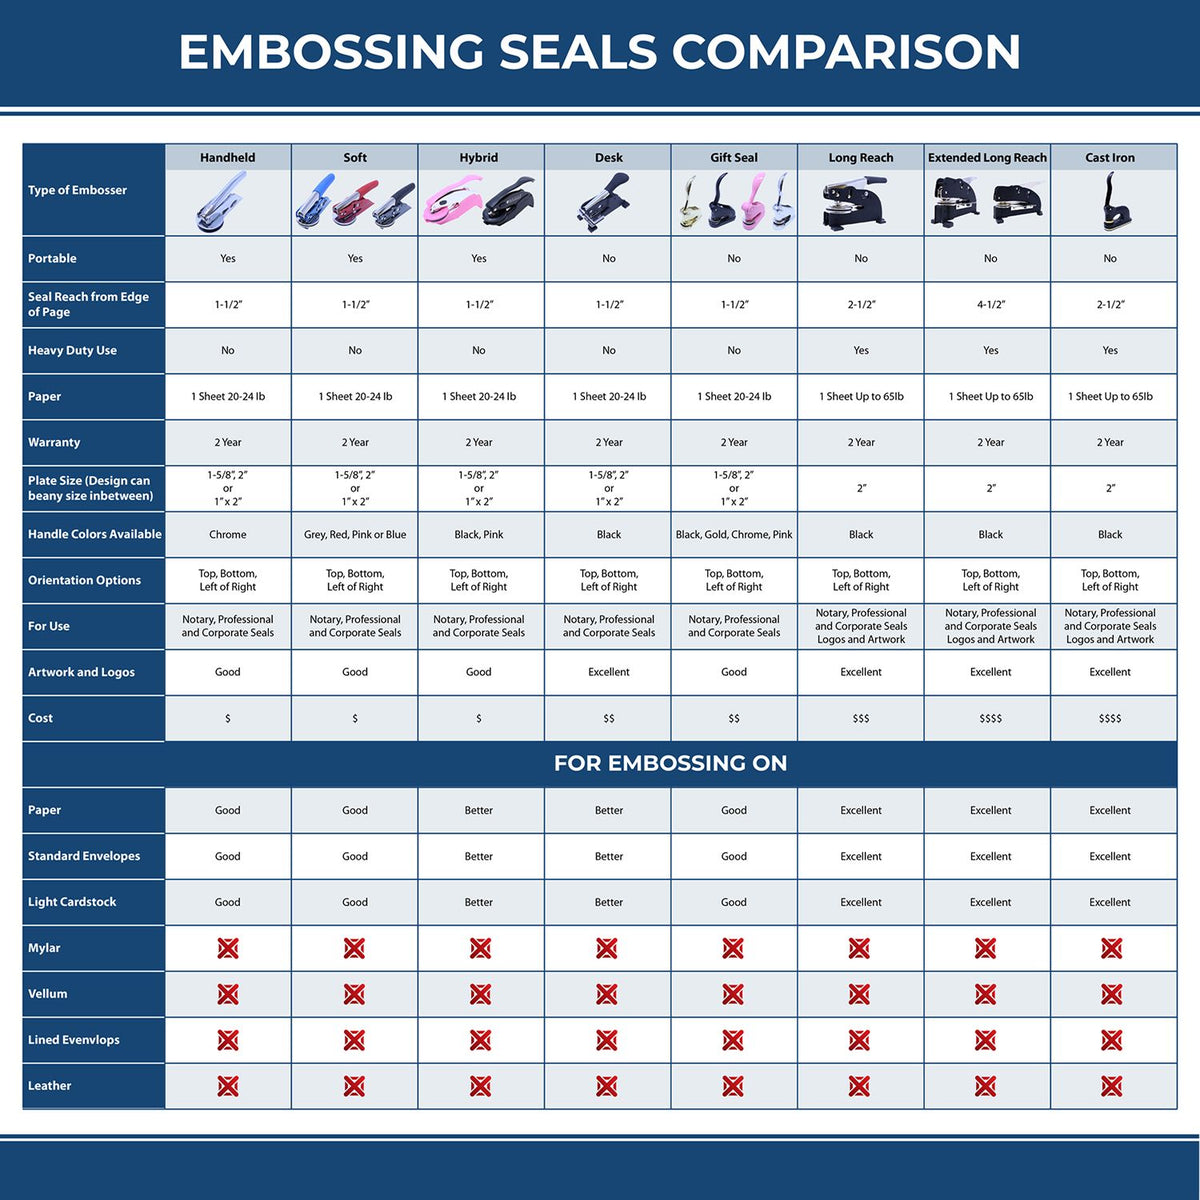 A comparison chart for the different types of mount models available for the Handheld Louisiana Architect Seal Embosser.